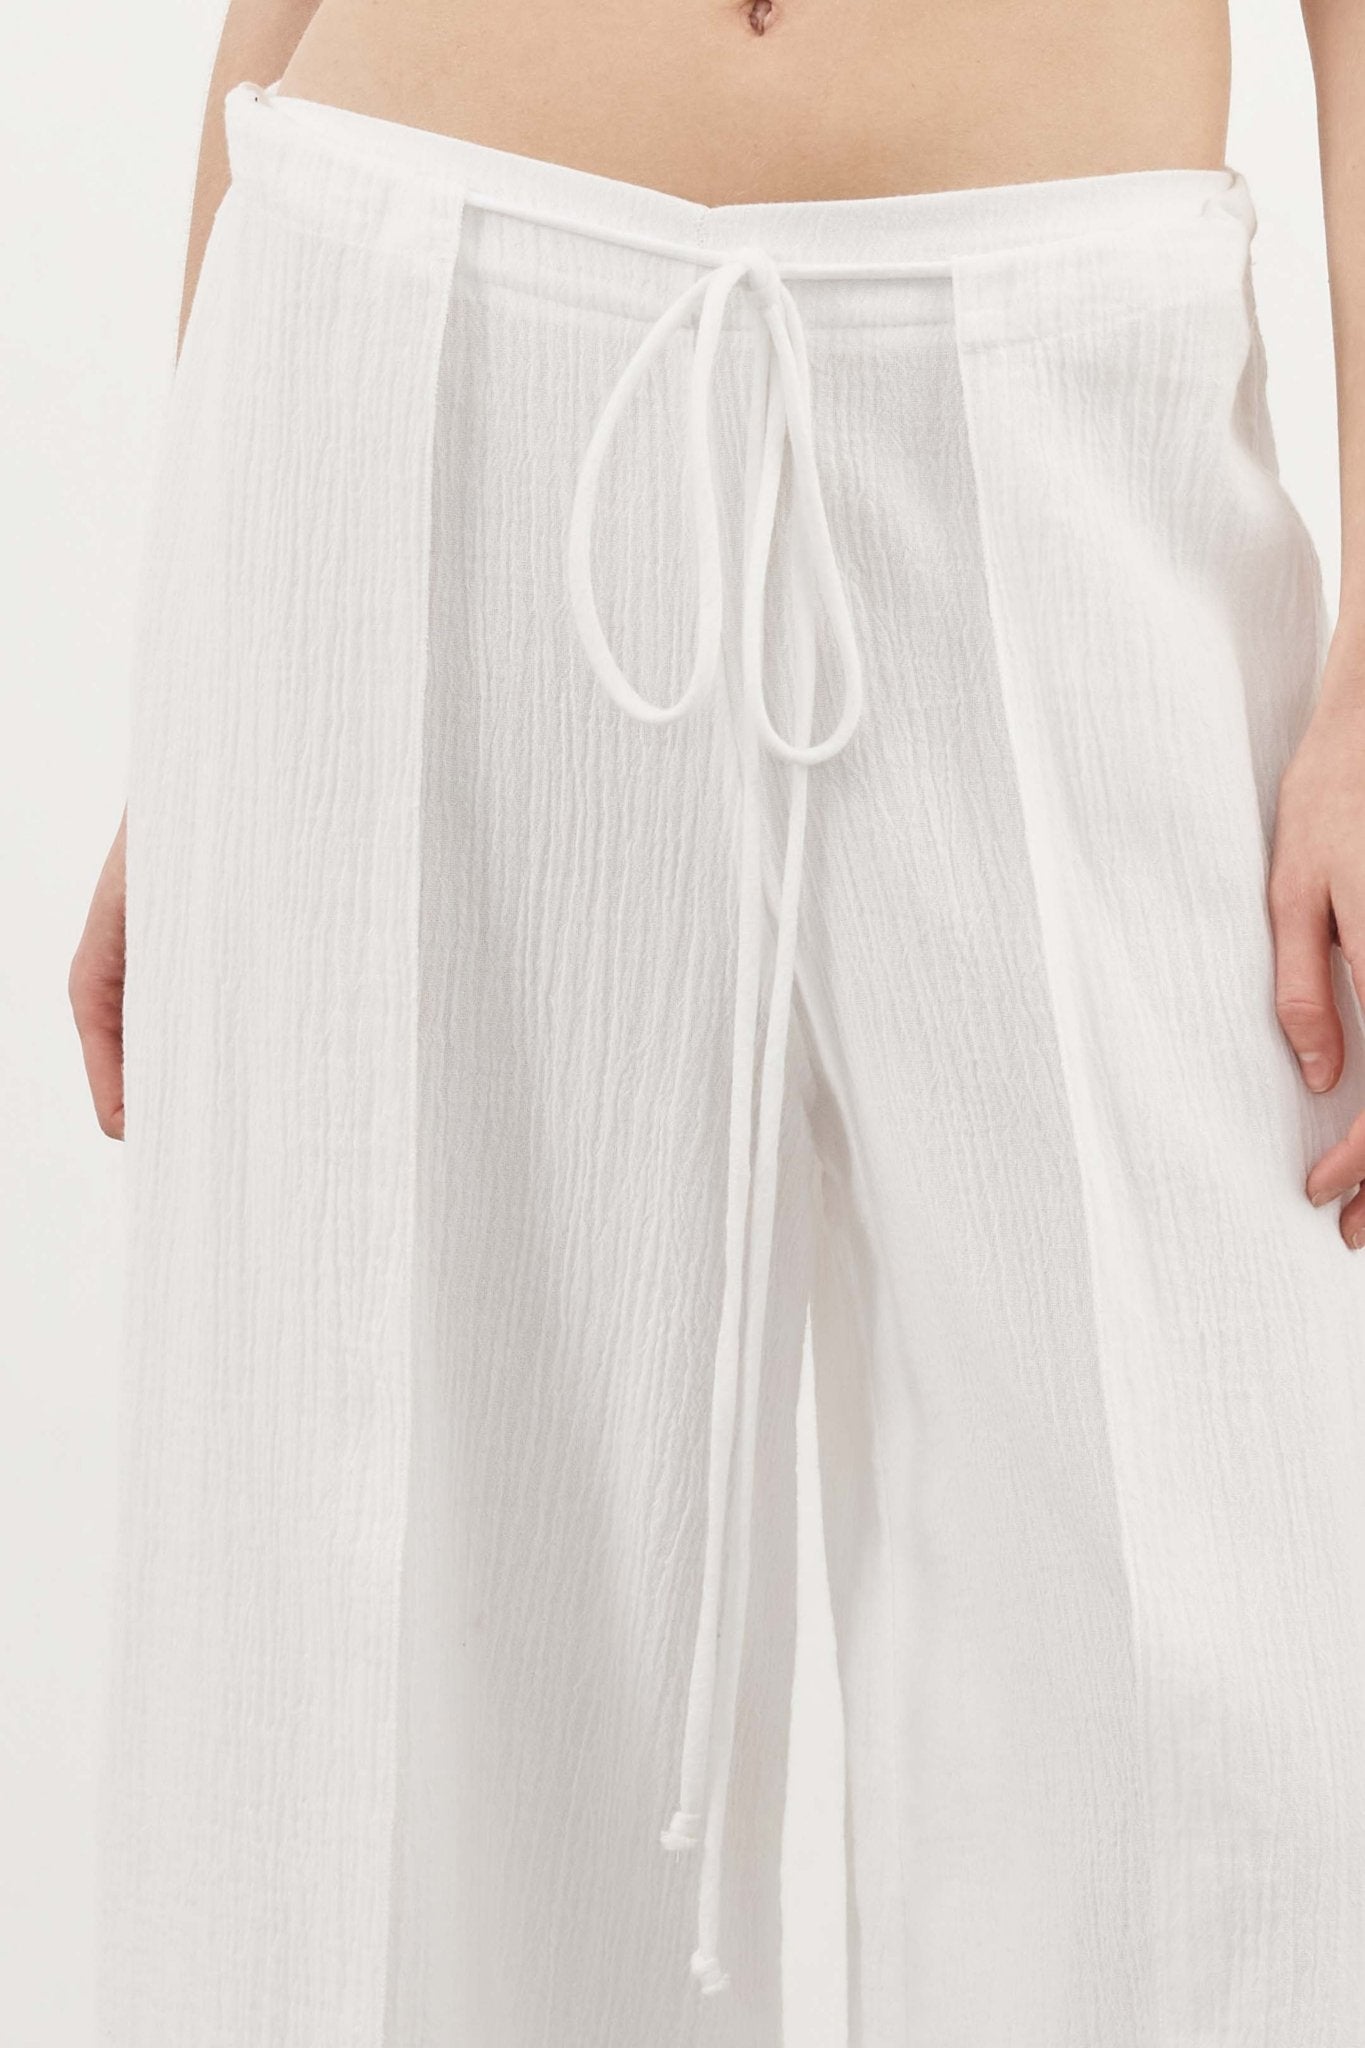 June Pants - White by The Handloom